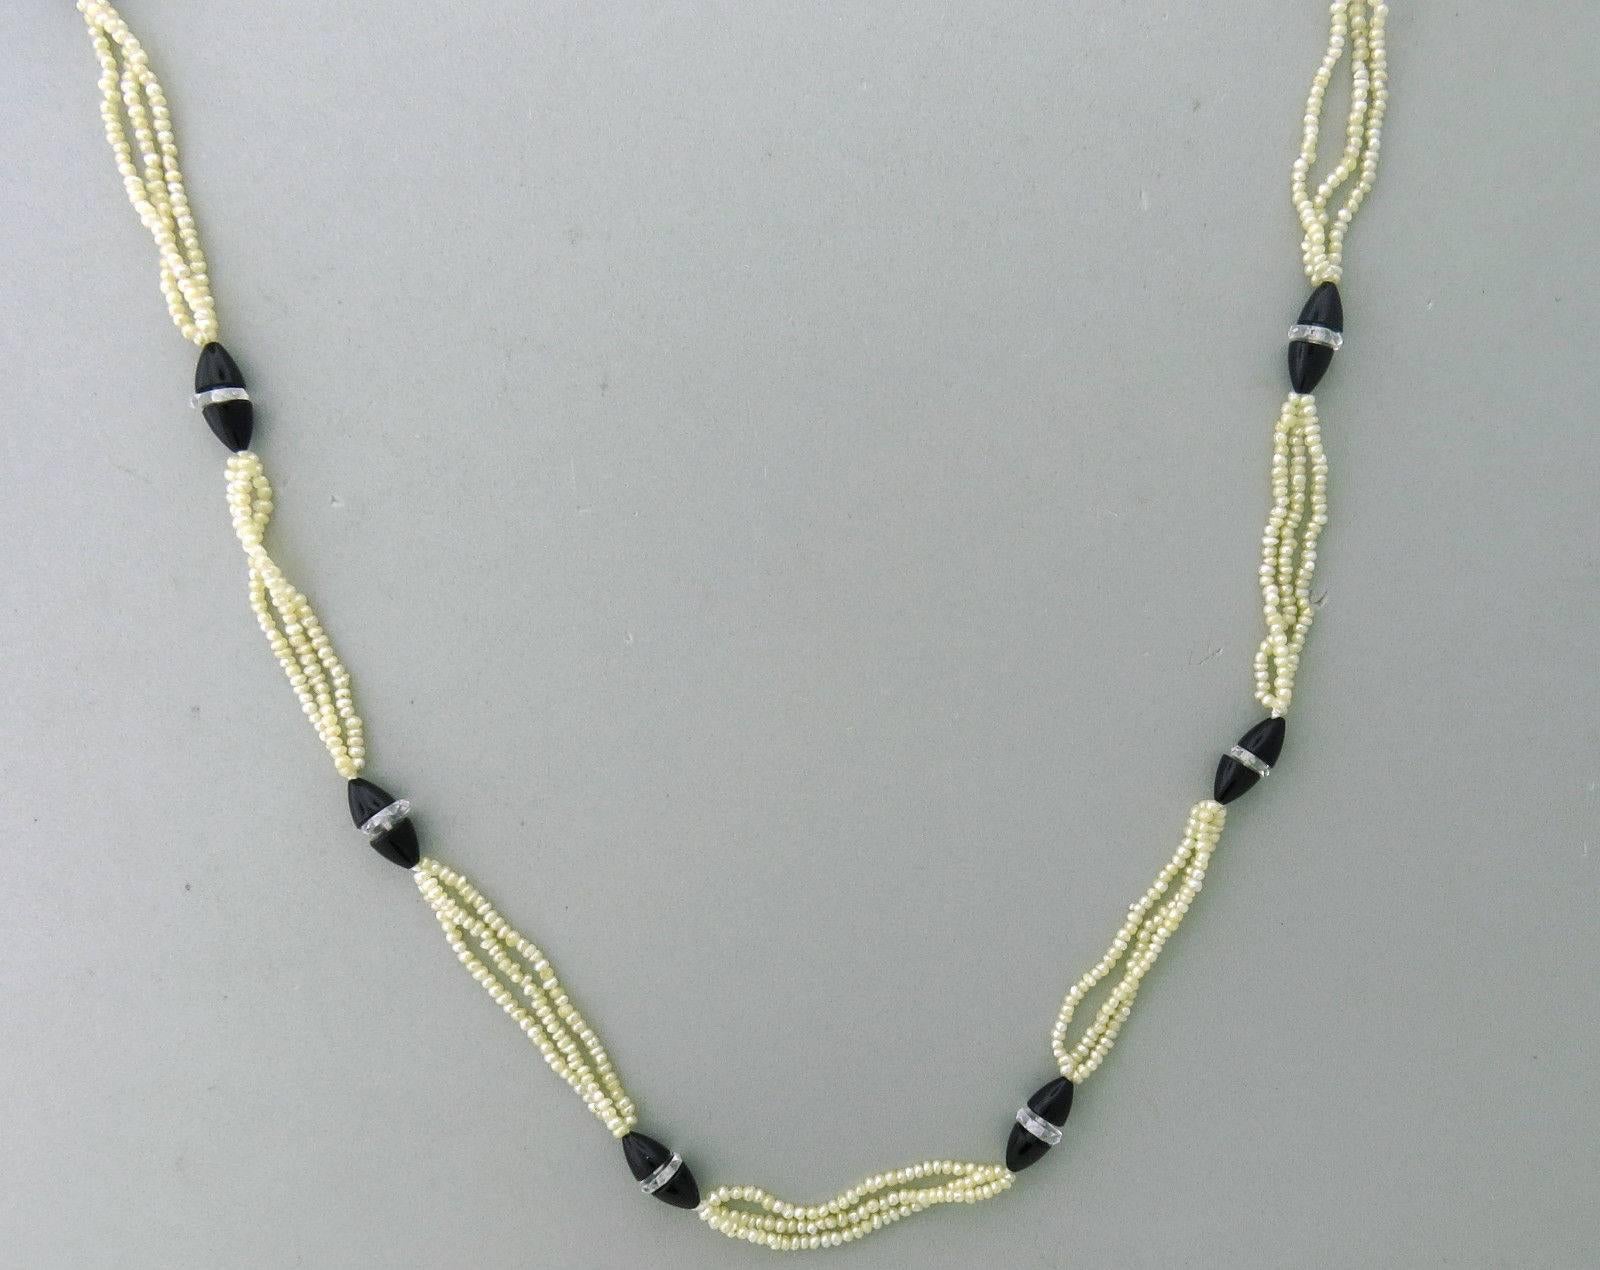 Vintage 1920's Mikimoto 18K white gold necklace featuring pearls, onyx and cut crystals. The necklace is 43